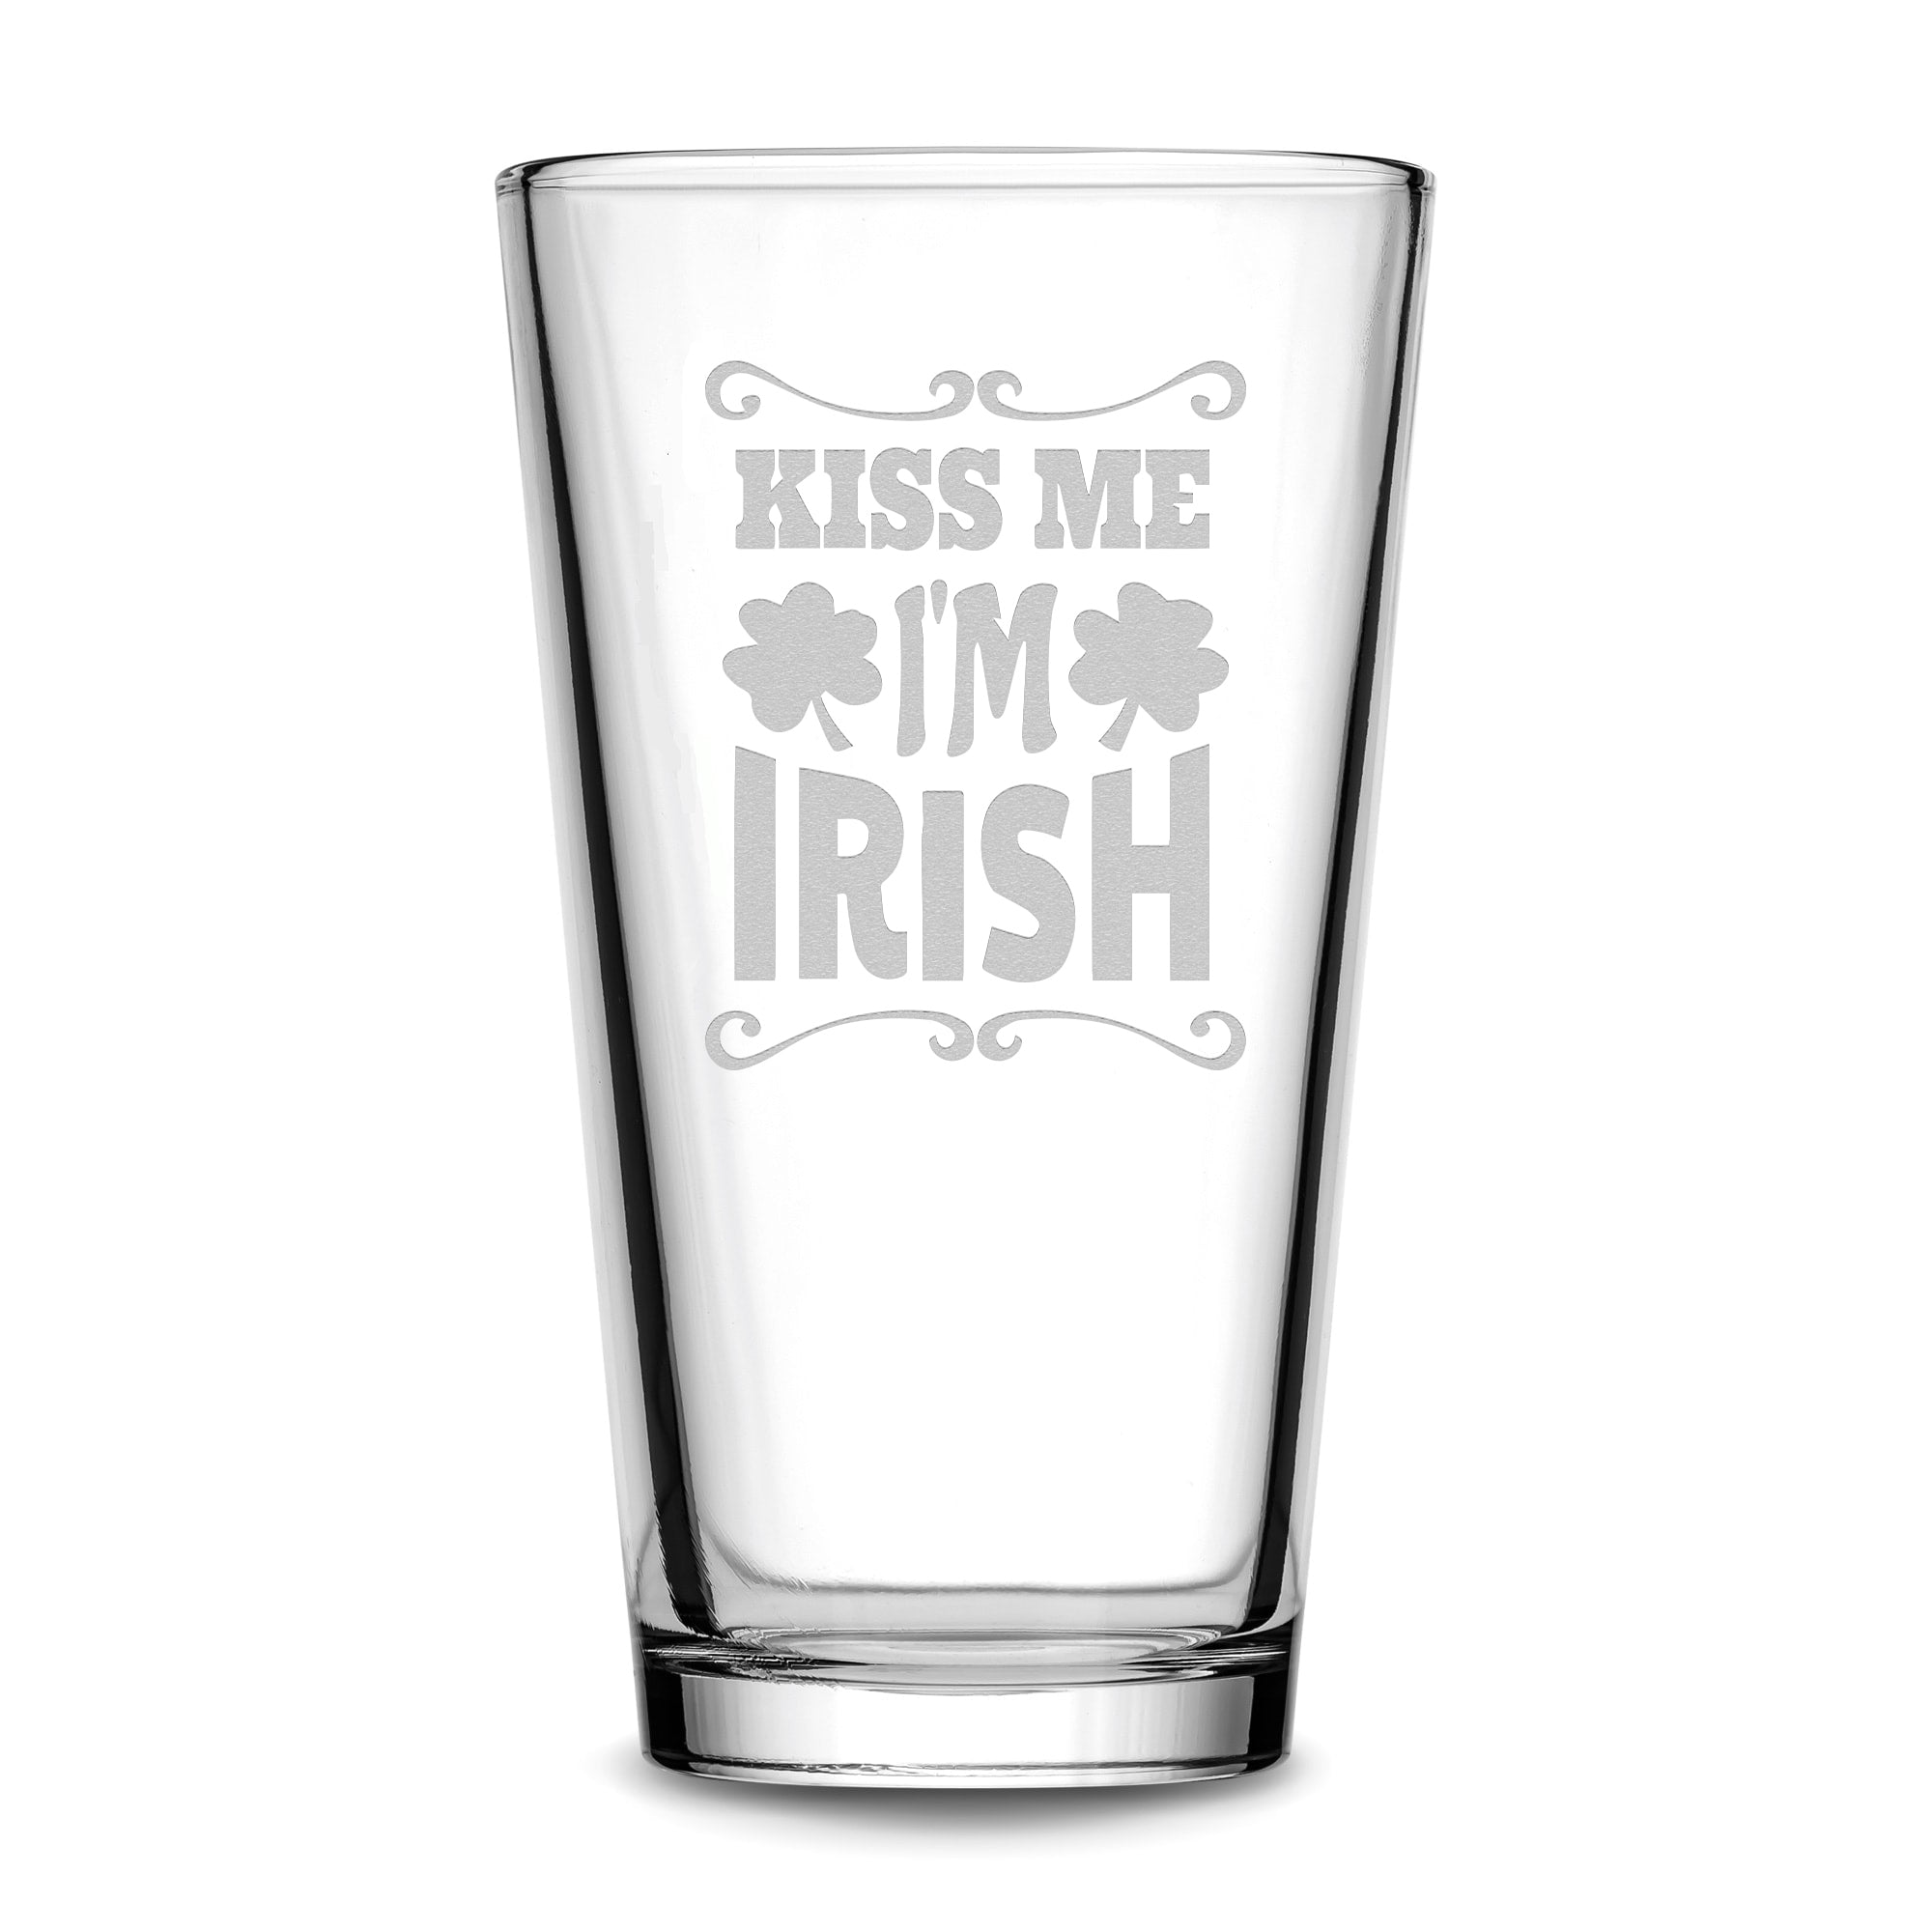 Premium Etched Pint Glass, Kiss Me I'm Irish, 16oz, Laser Etched or Hand Etched